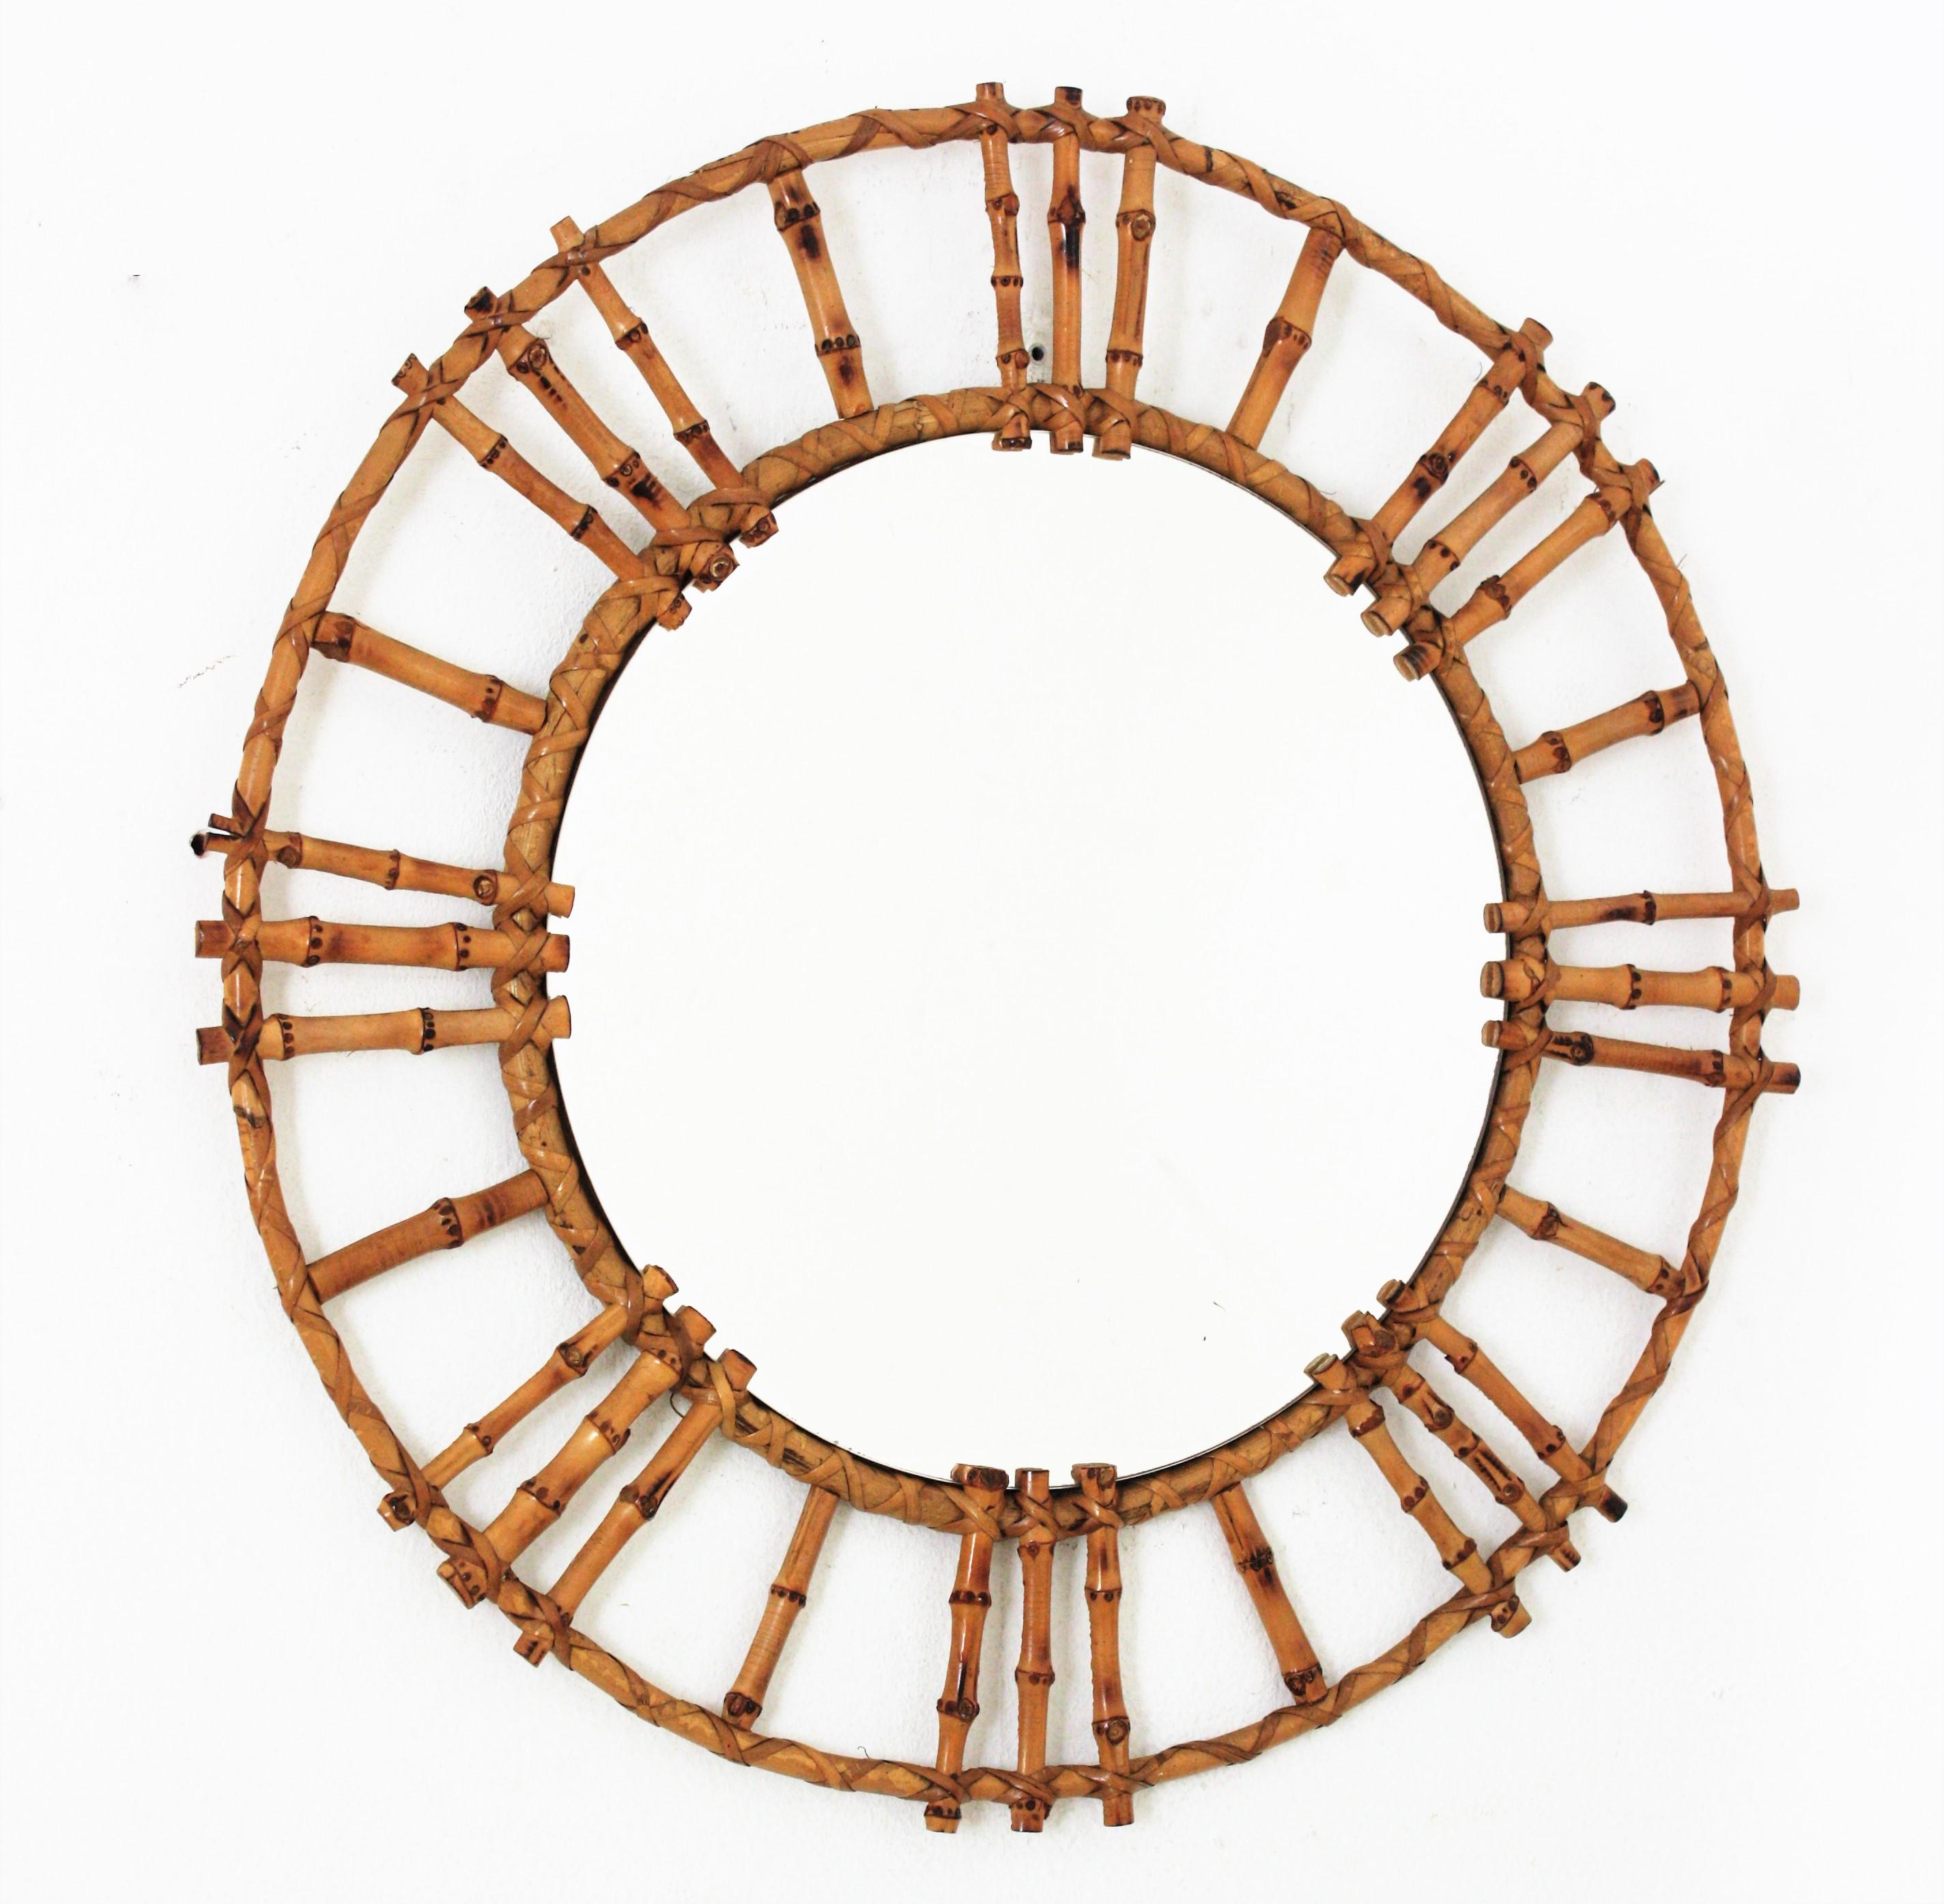 Spanish bamboo rattan round sunburst mirror, 1950s.
Handcrafted wall mirror with rattan and bamboo frame. It has a nice design with Tiki style reminiscences. 
This mirror will add a fresh Midcentury but Tiki accent to any interior decoration.
